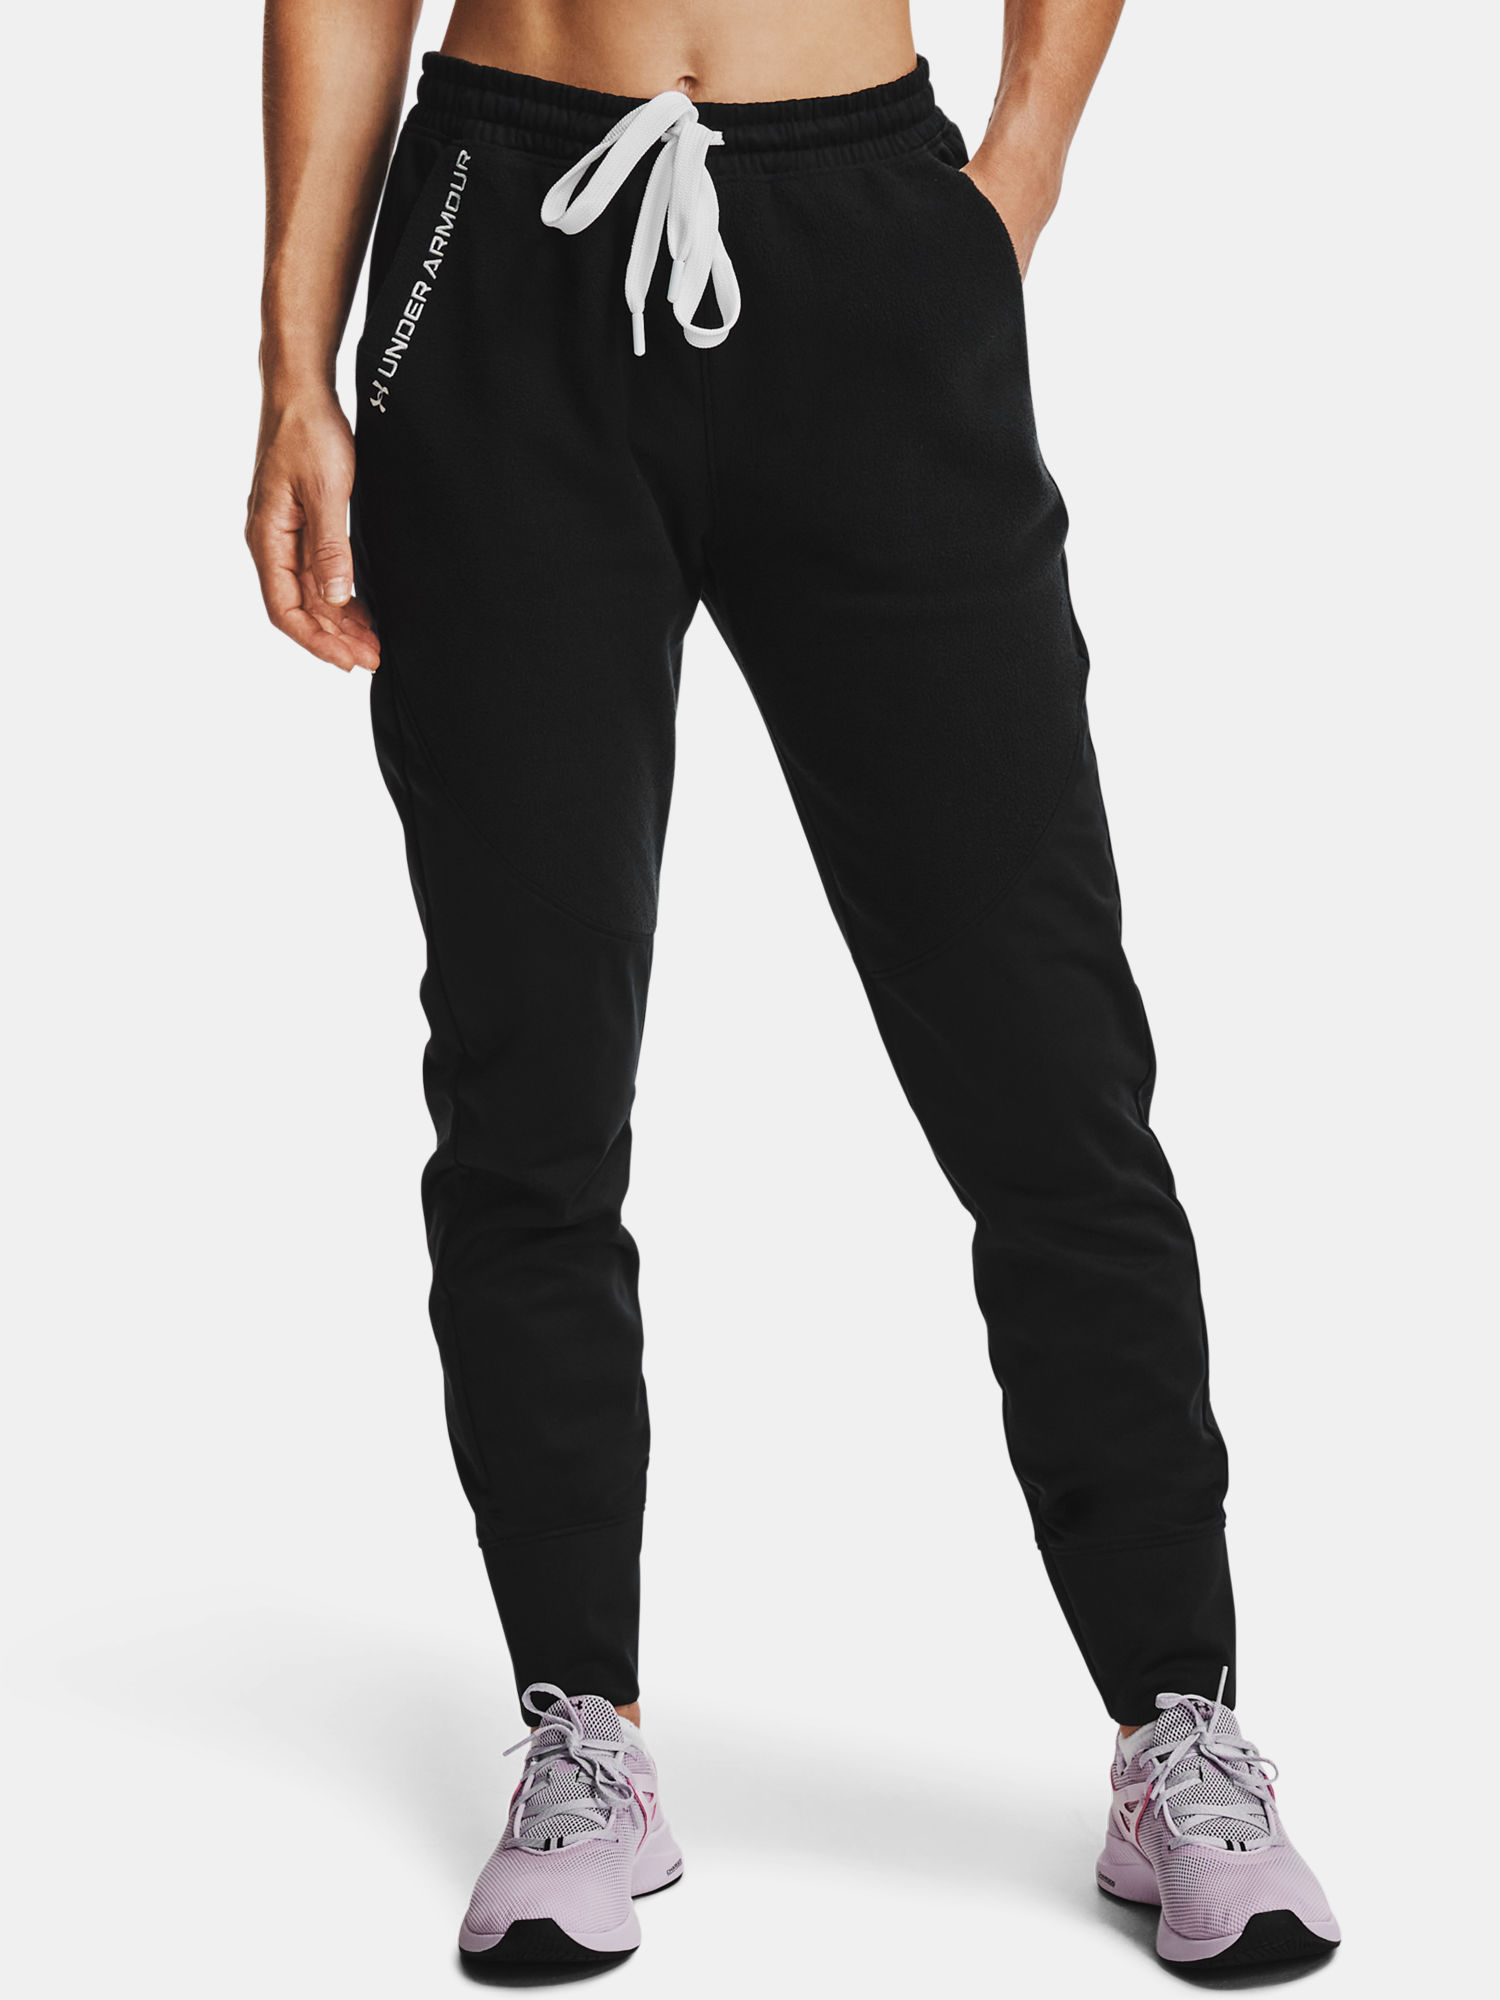 Kalhoty Under Armour Recover Fleece Pants-BLK (1)